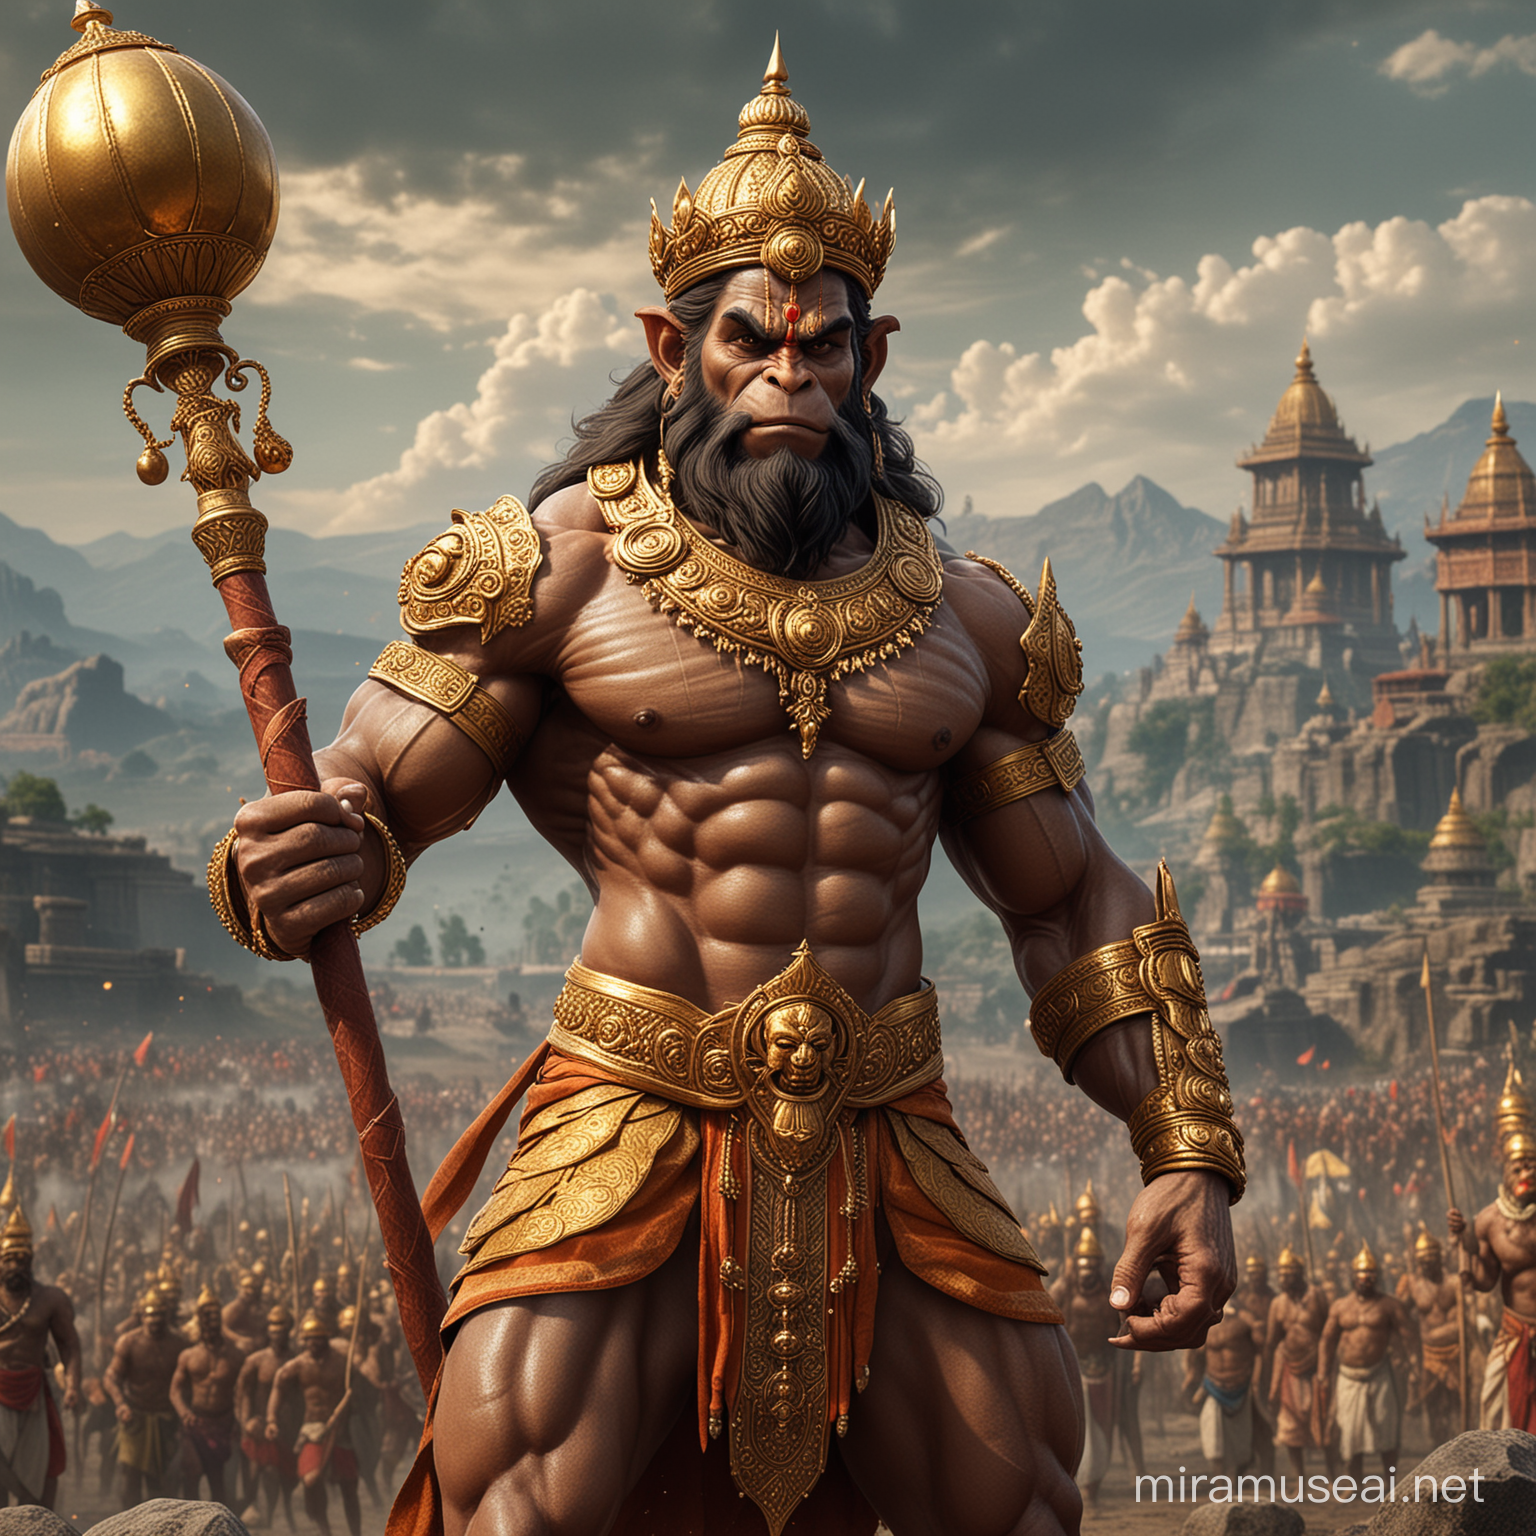 Very muscular and tall Hanuman, holding a long handle huge Golden mace bomb in right hand, 
wearing crown, battle field in the background, detailed and intricate environment, dynamic pose, muscles defined with chiseled aesthetics, traditional attire draped elegantly, vivid, ultra realistic.